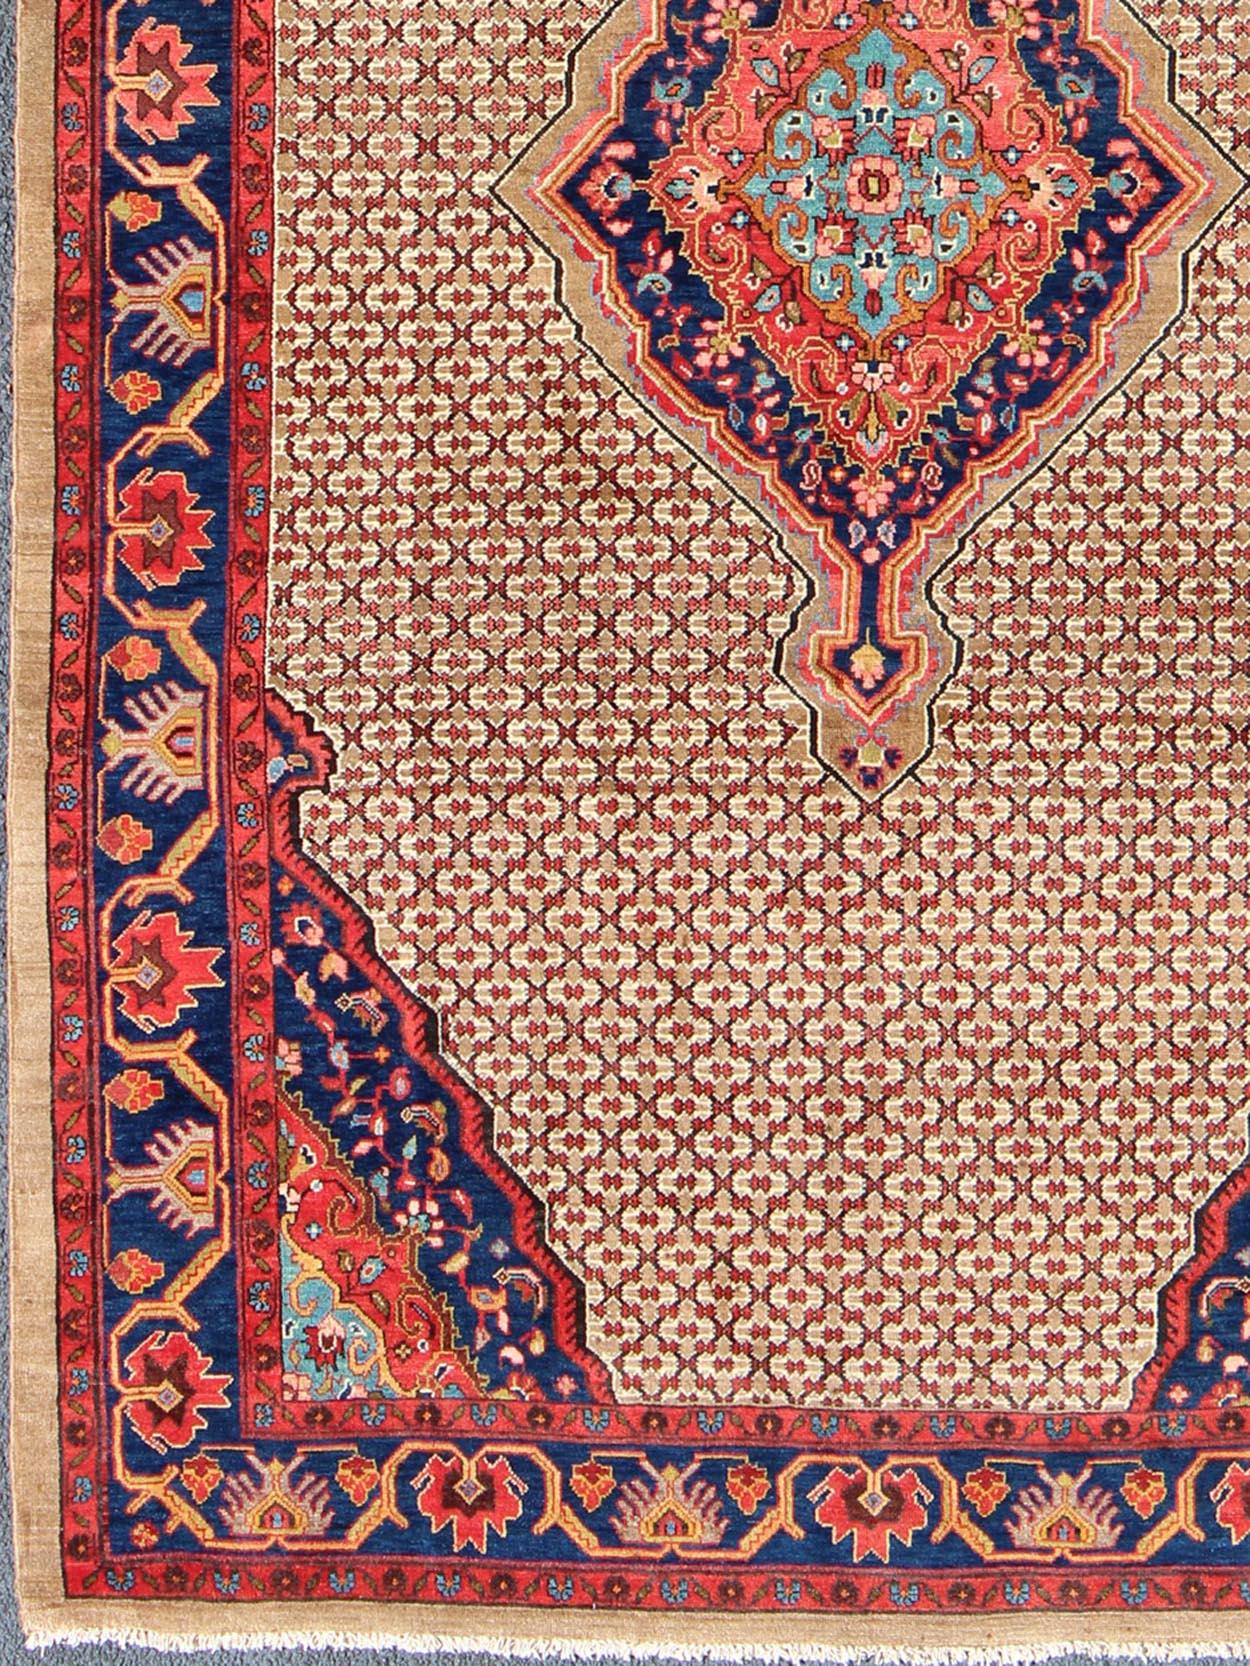 Blue, red and cream vintage Persian Hamedan rug with floral layered medallion Design, rug h-501-41, country of origin / type: Iran / Hamedan, circa 1950.

This magnificent Hamedan features beautiful coloration, including tones of light and navy